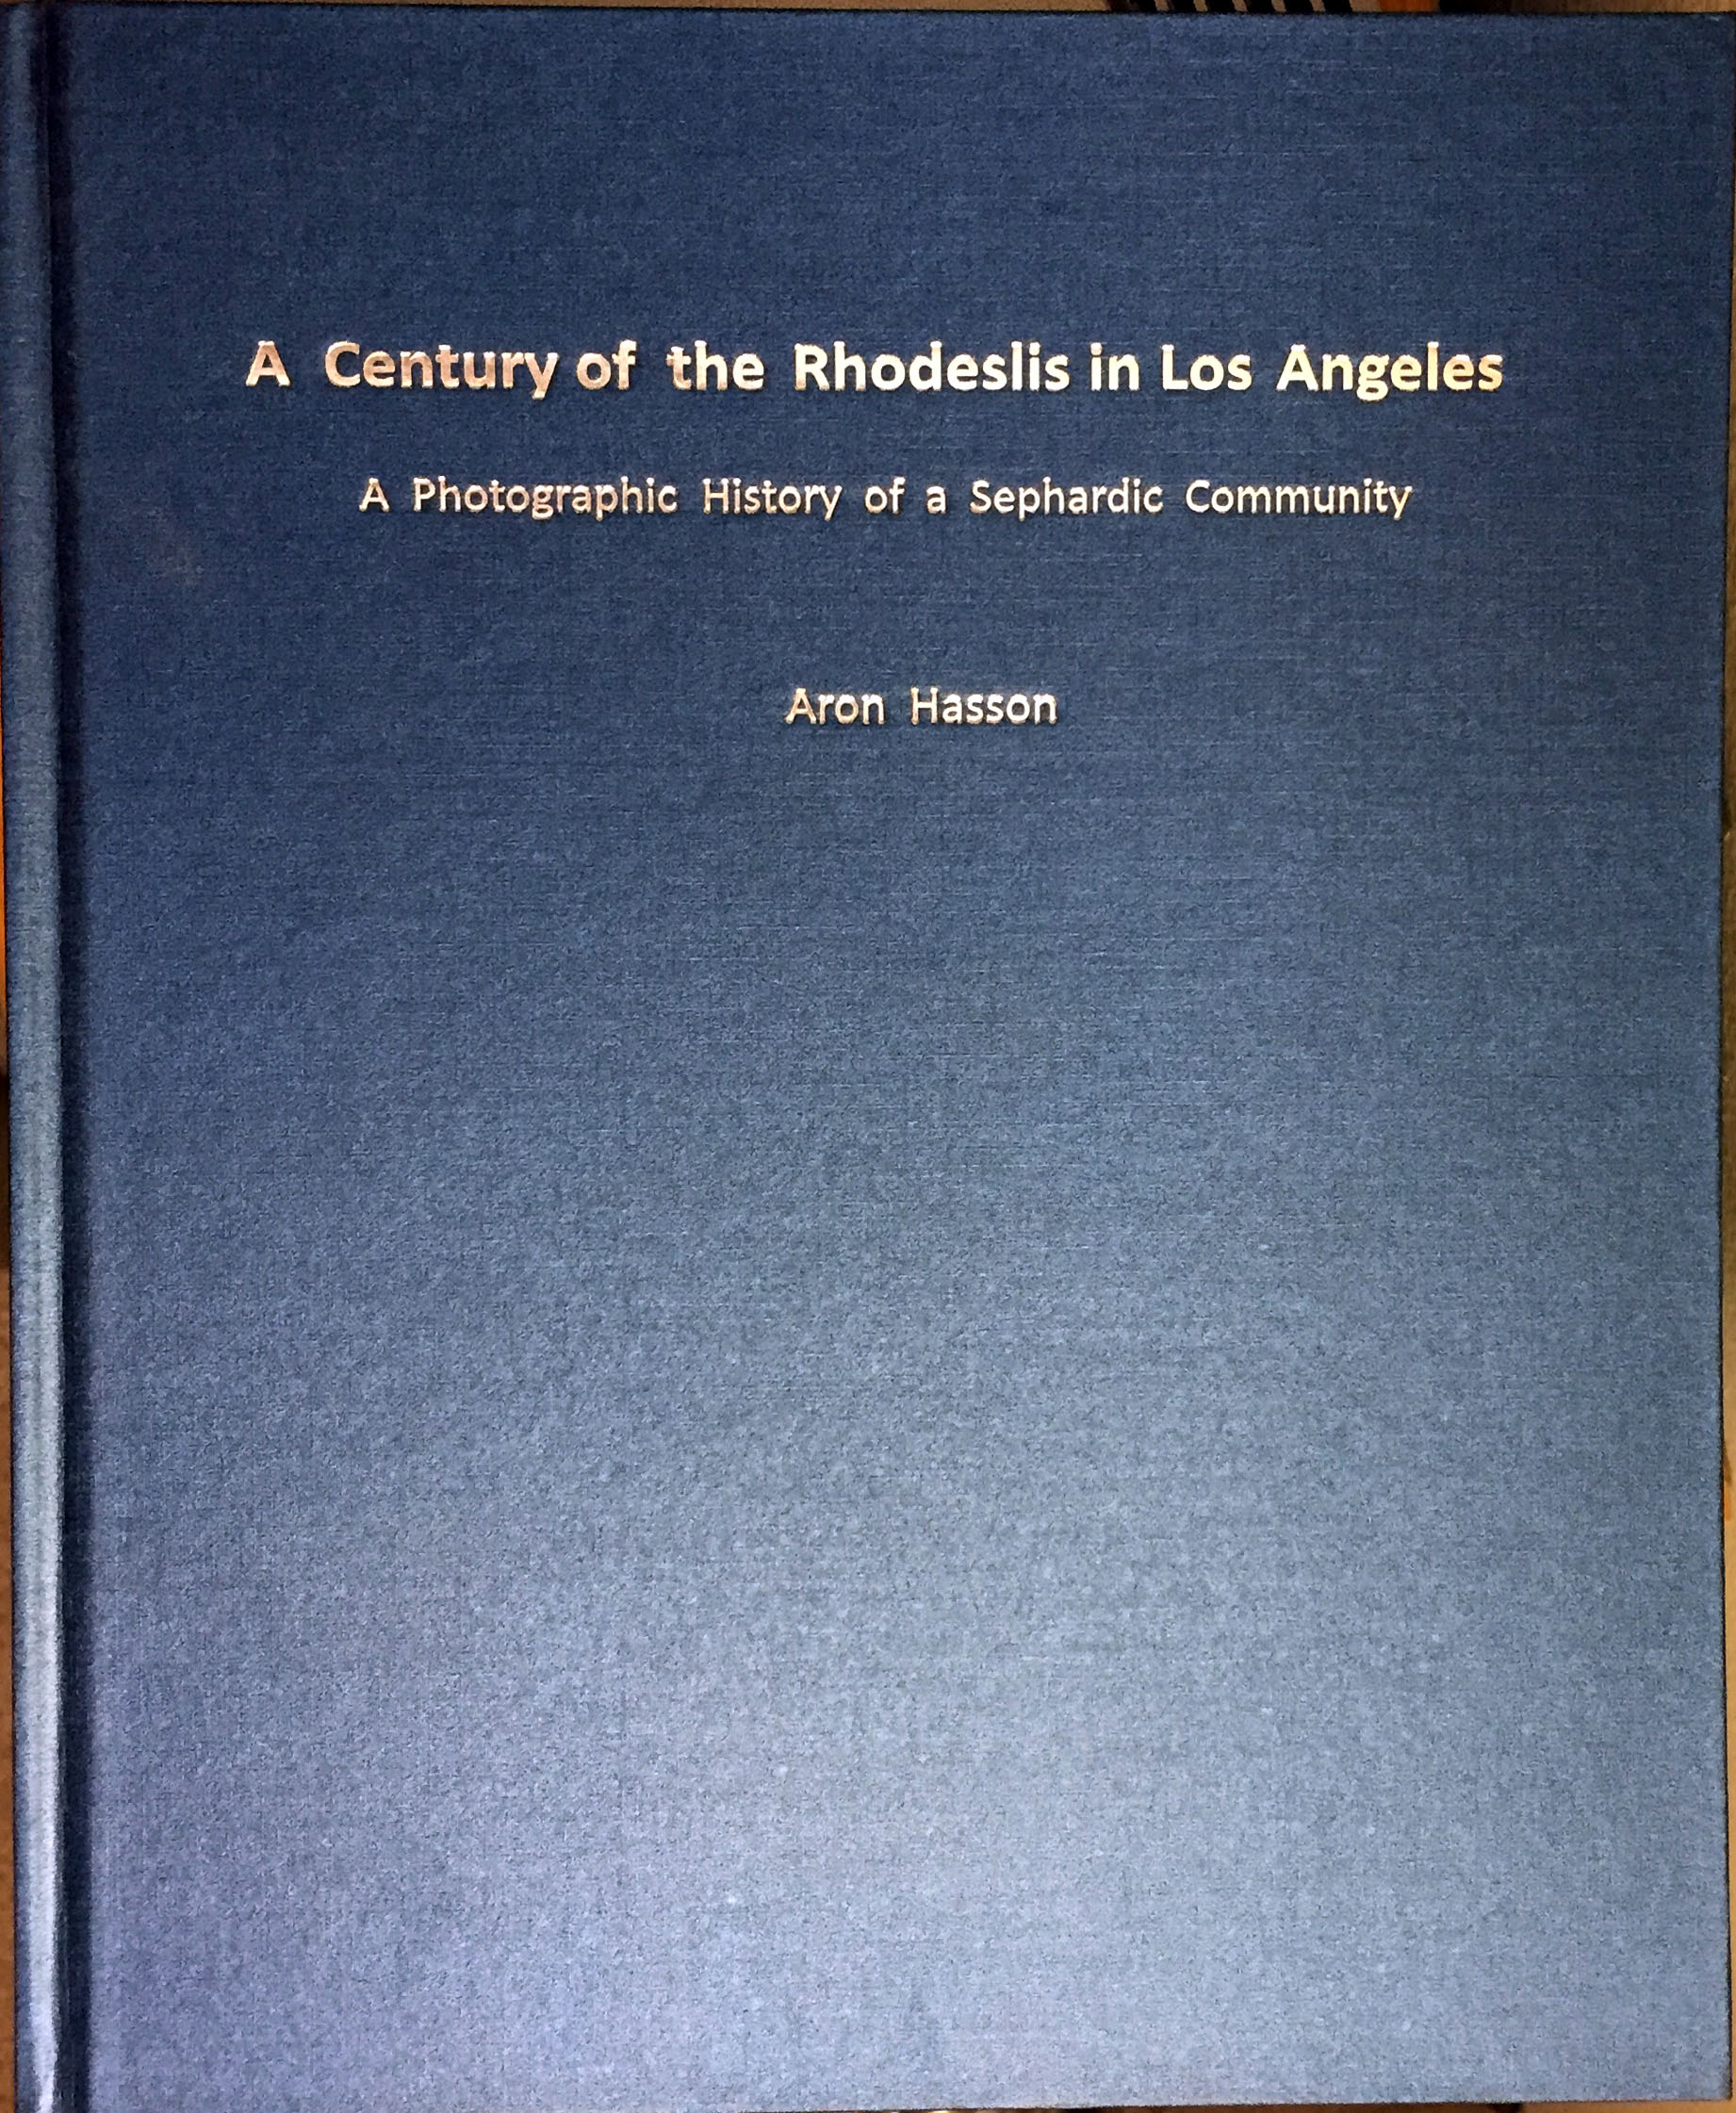 A Century of the Rhodeslis in Los Angeles